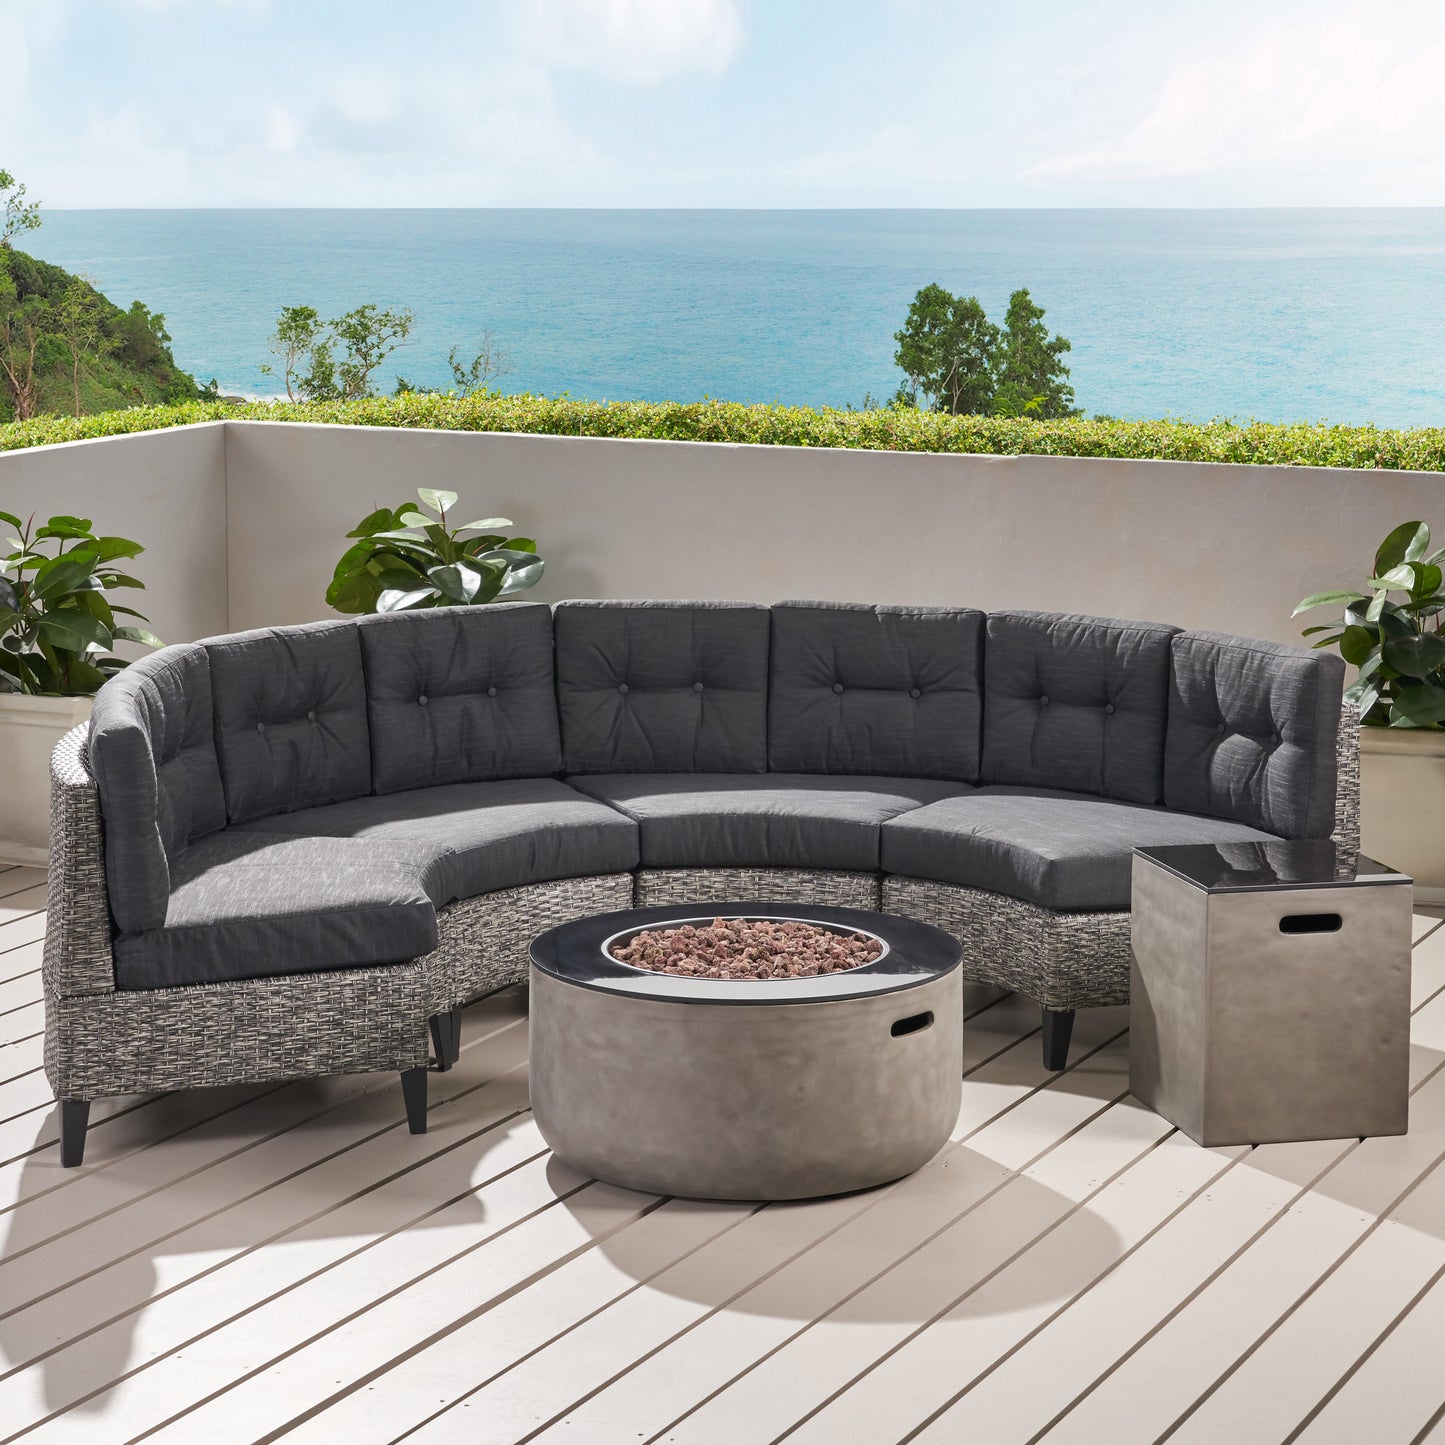 Breann Outdoor Round 4 Seater Wicker Sectional Set with Fire Pit and Tank Holder